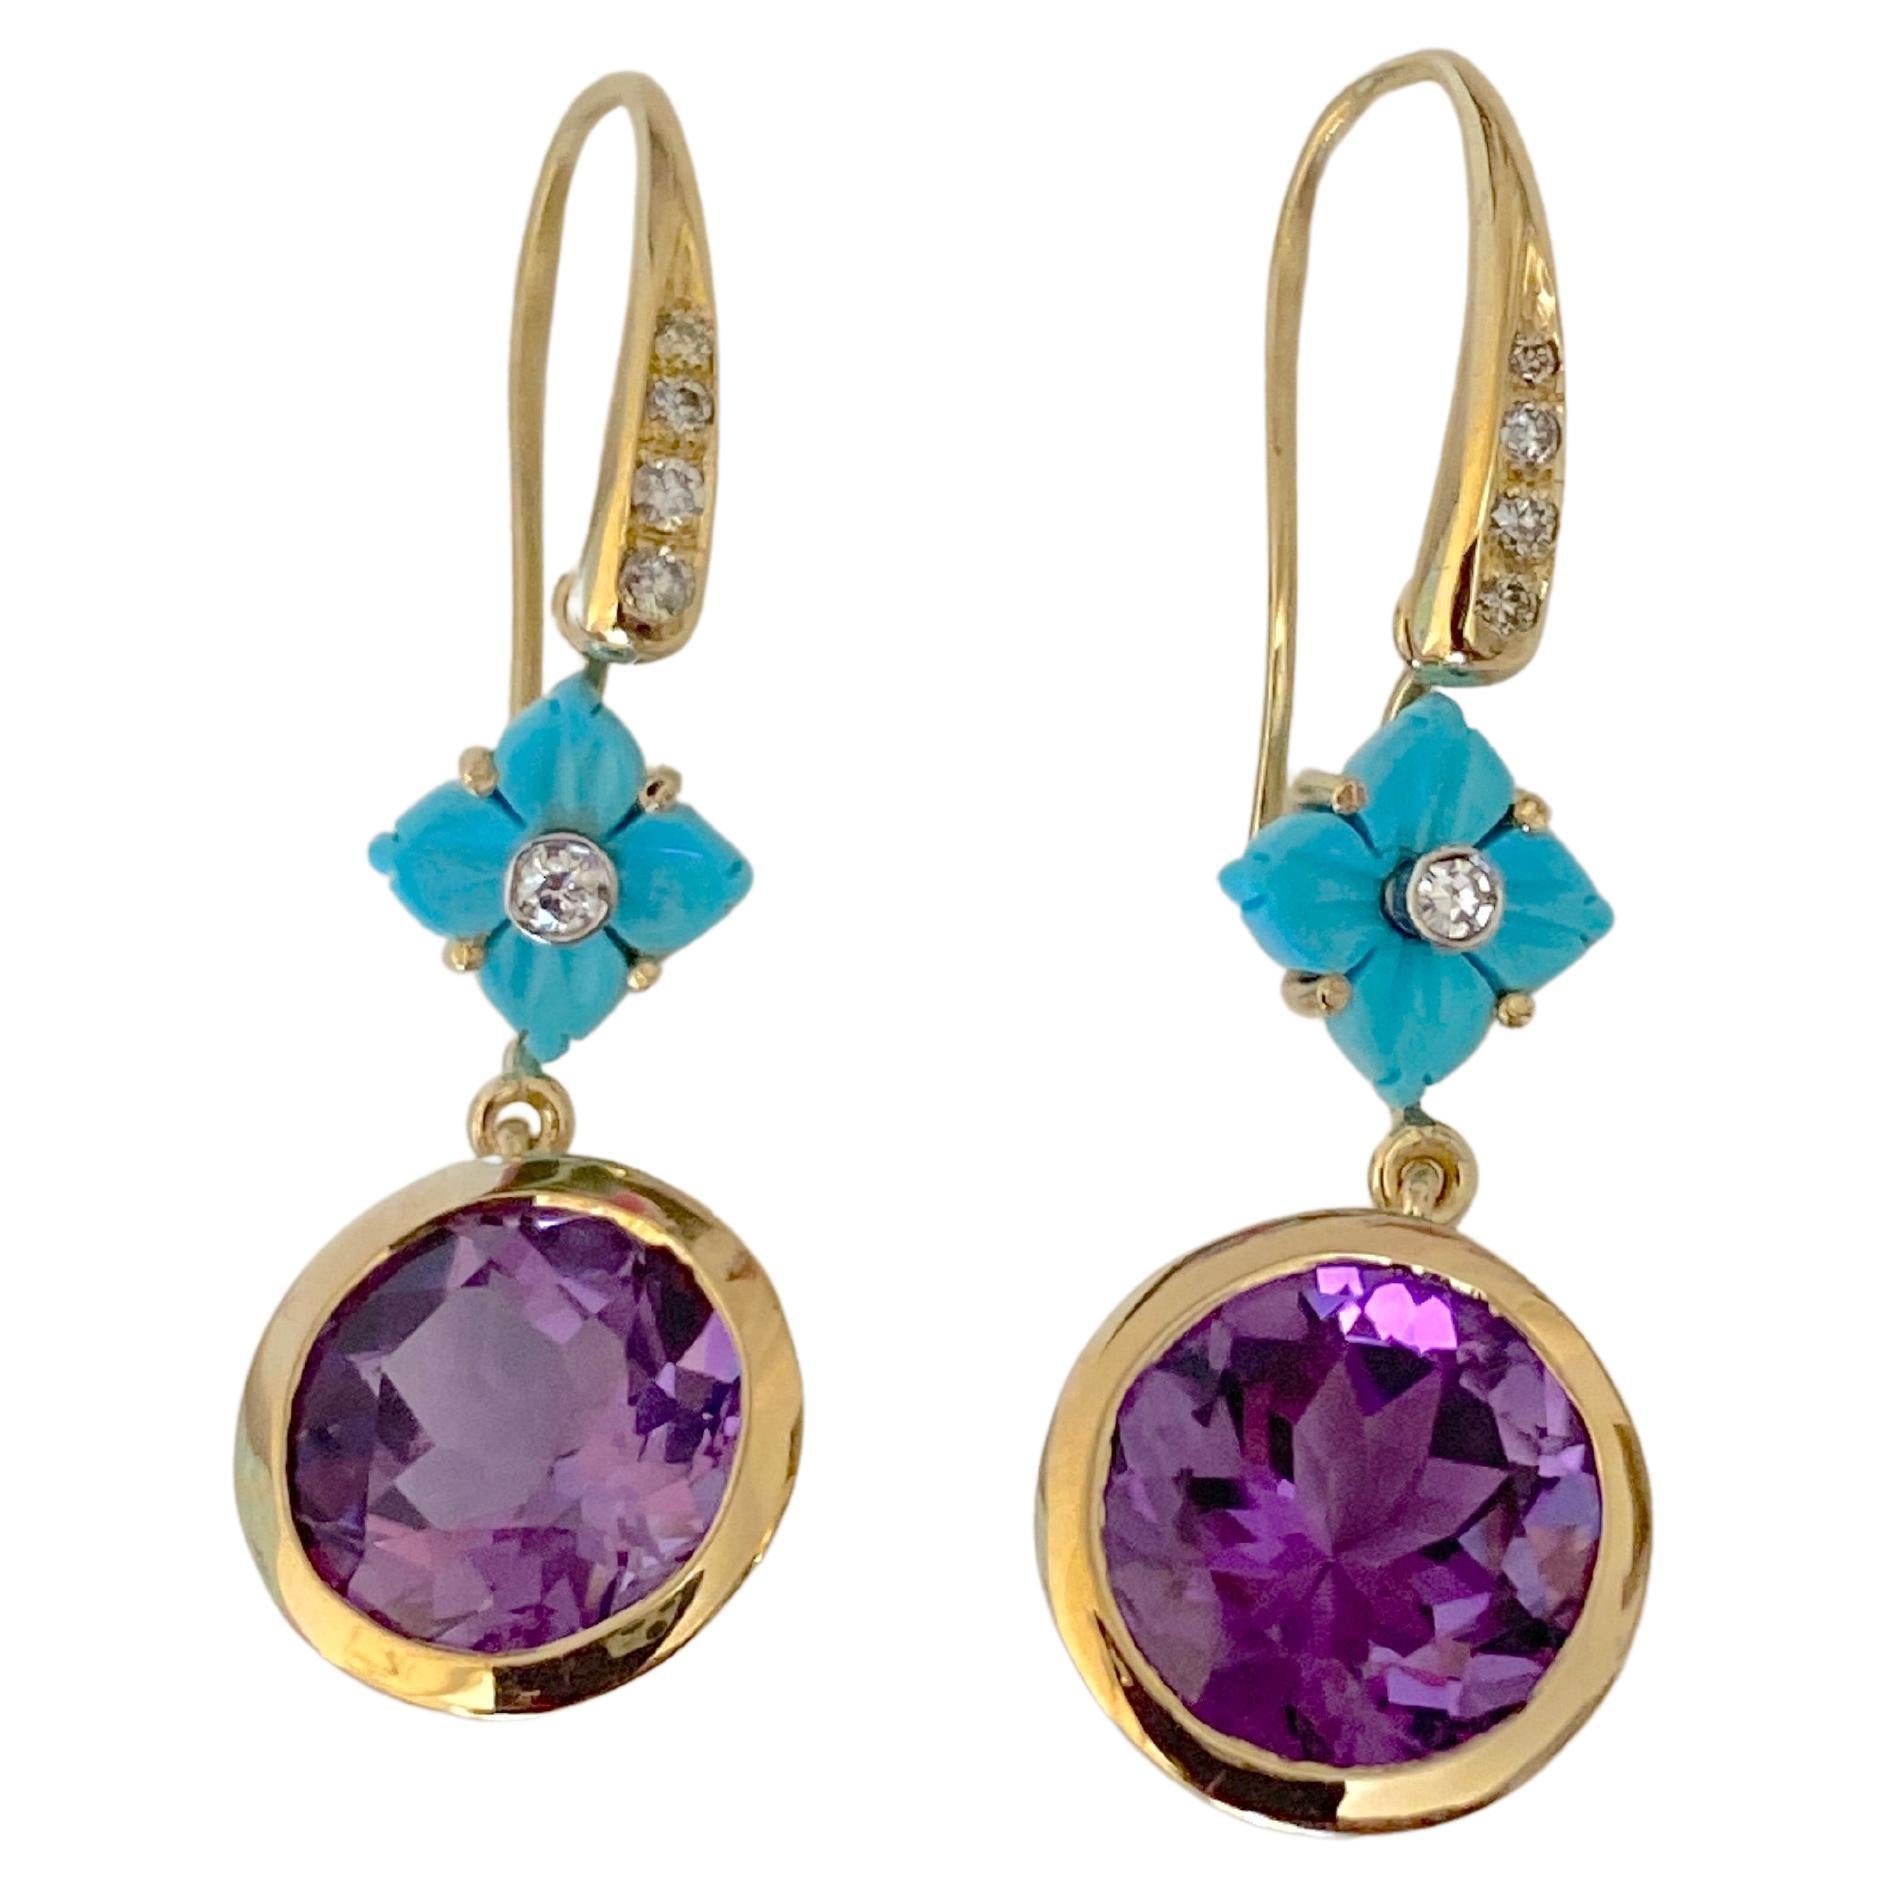 Unique 18k Gold Earrings Turquoise Flower Amethyst Diamonds Handcrafted in Italy For Sale 2